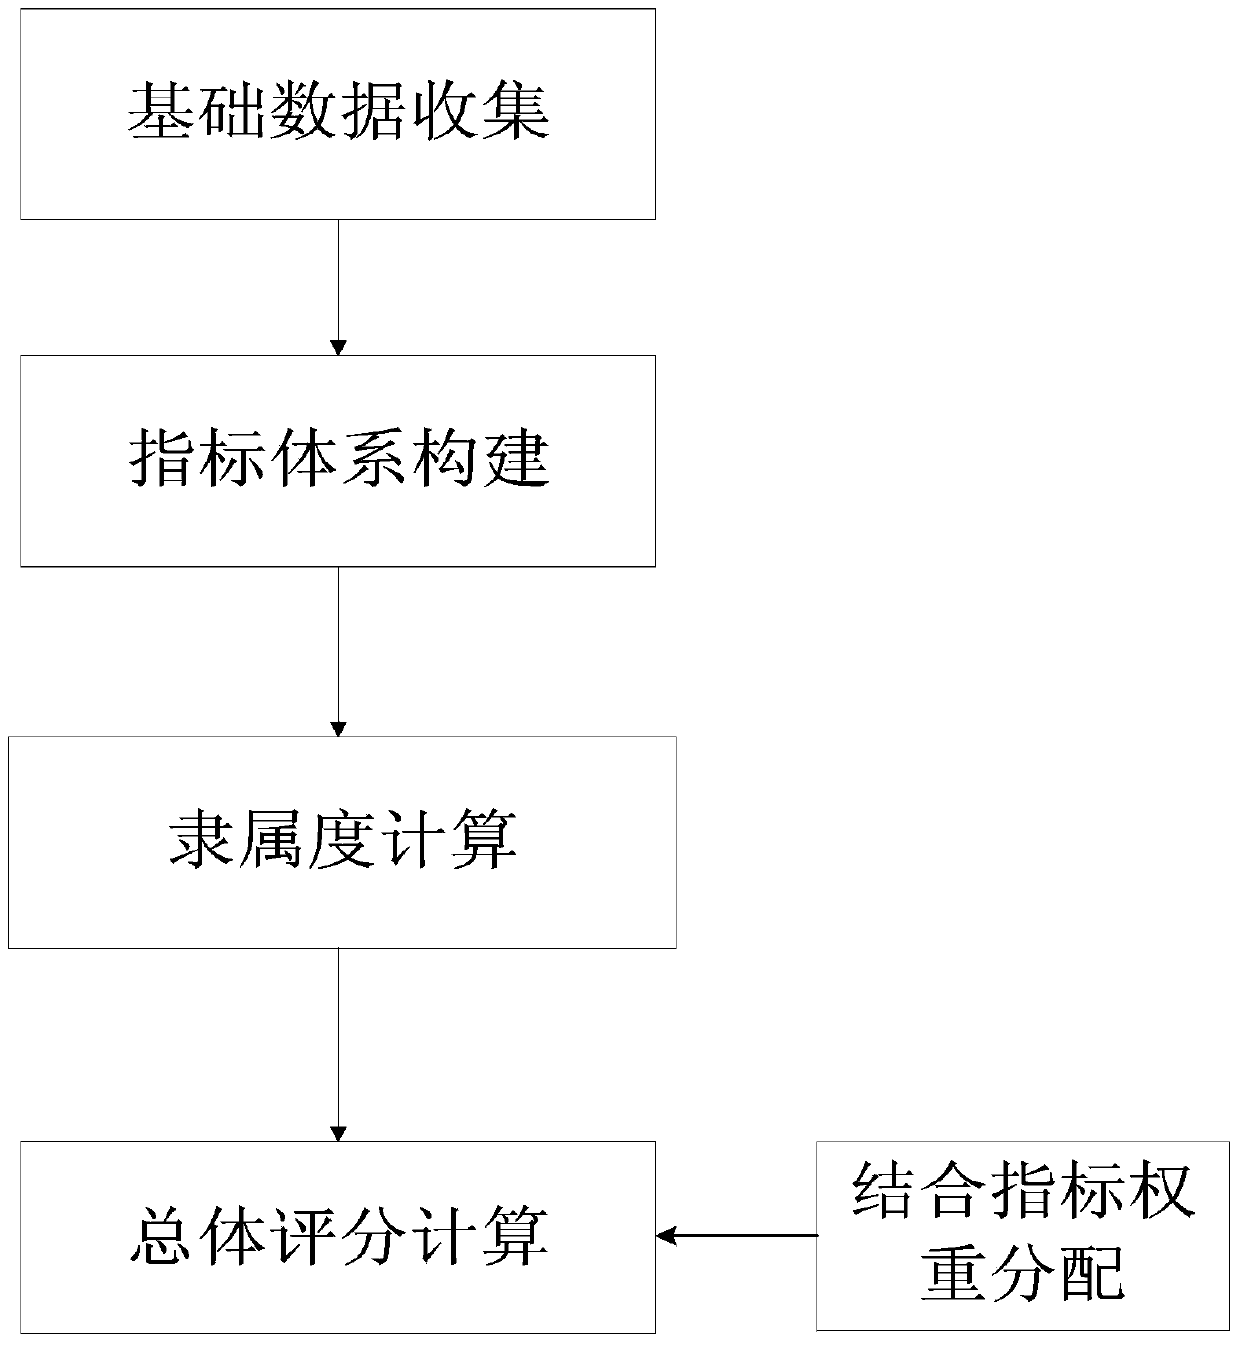 Method for evaluating comprehensive property of day-ahead power generation plan